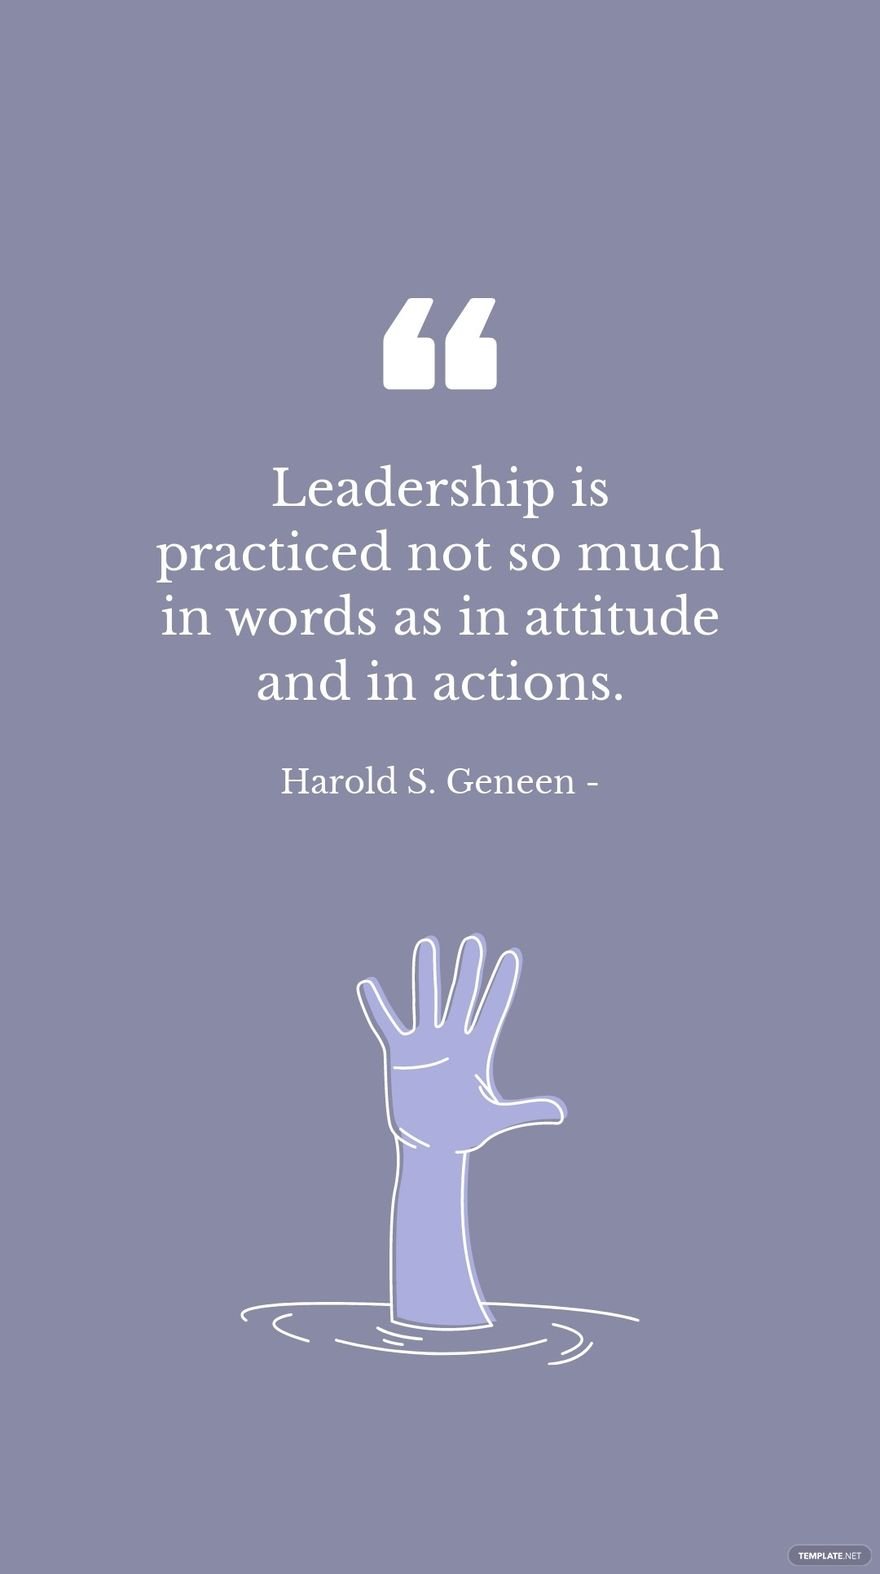 Free Harold S. Geneen - Leadership is practiced not so much in words as in attitude and in actions. in JPG